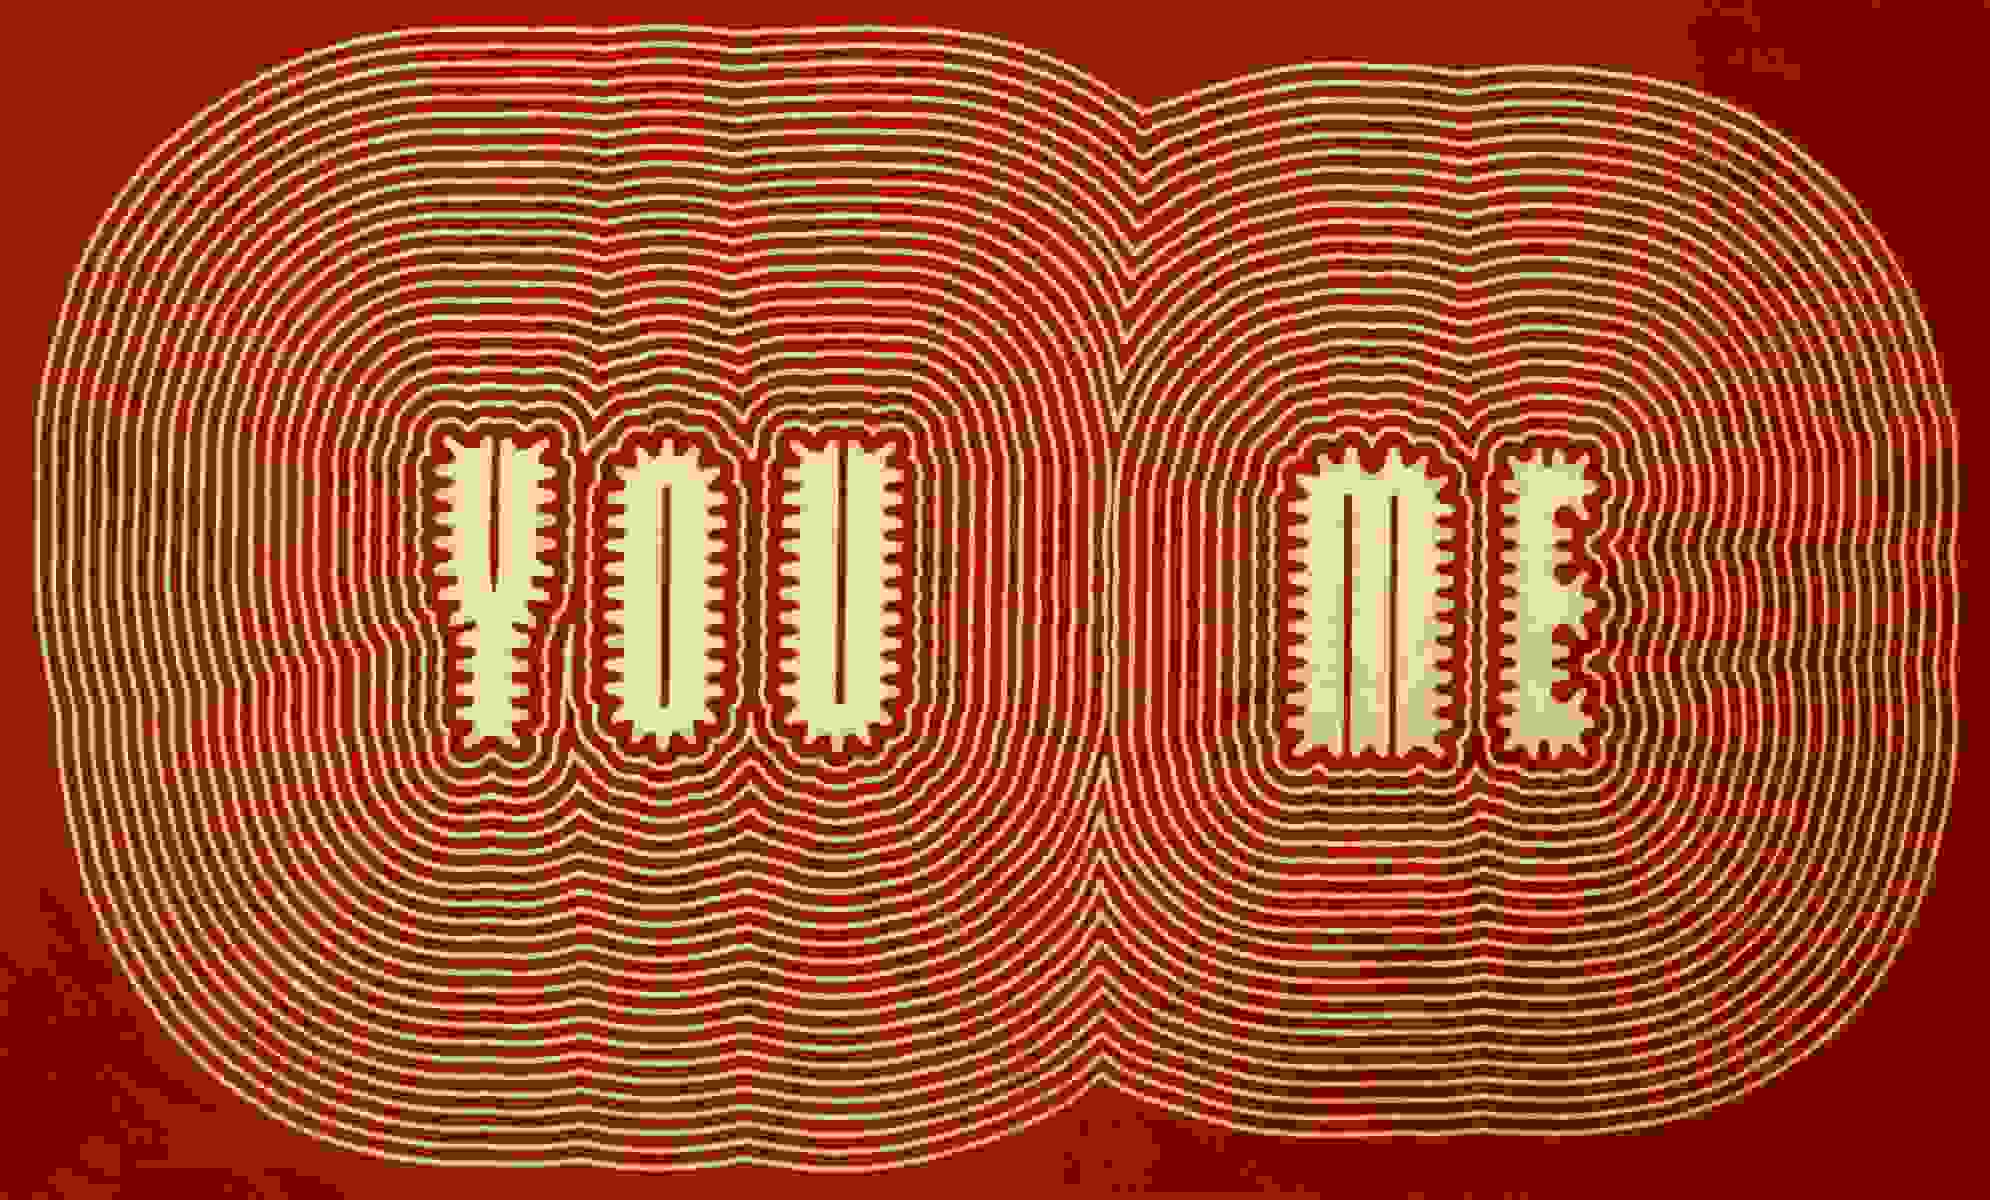 Stylized text artwork by Paula Scher in red and beige, "You Me," designed with a 'reverberating'-type effect around each word.